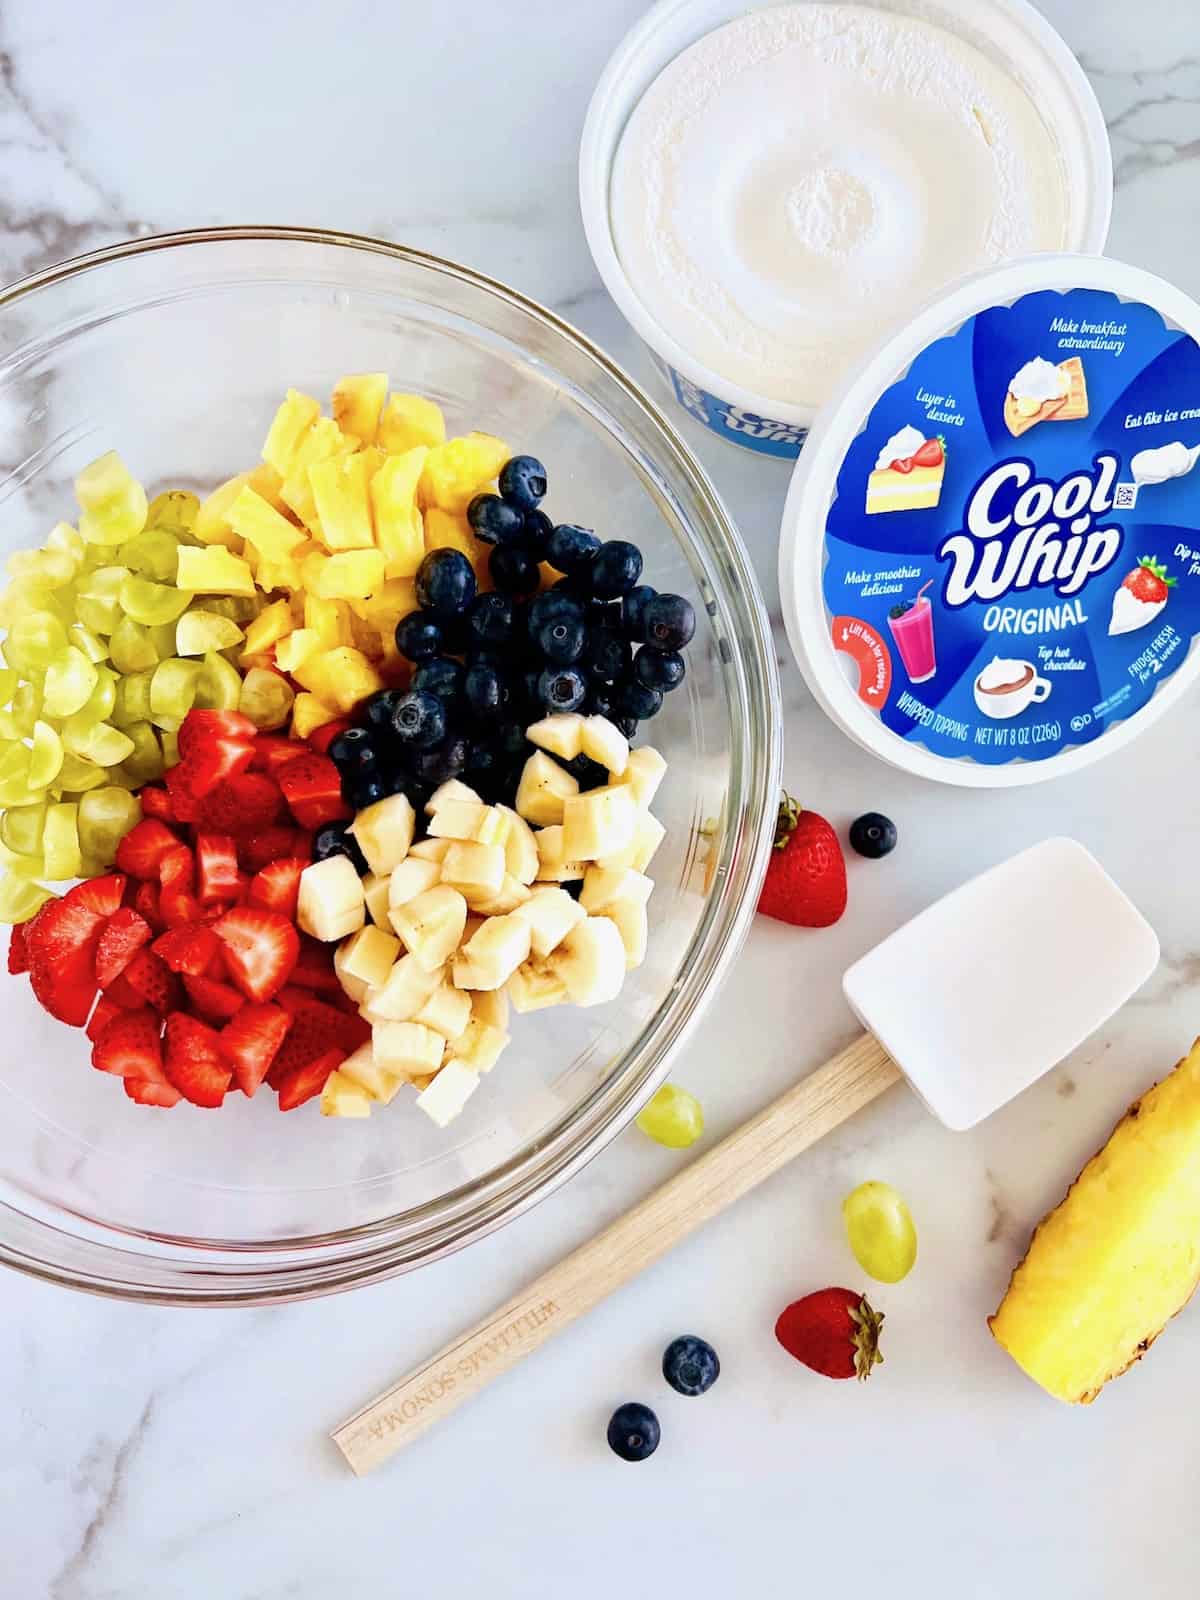 Fresh fruit blueberries and cut grapes strawberries pineapple and banana in a mixing bowl next to container of cool whip.